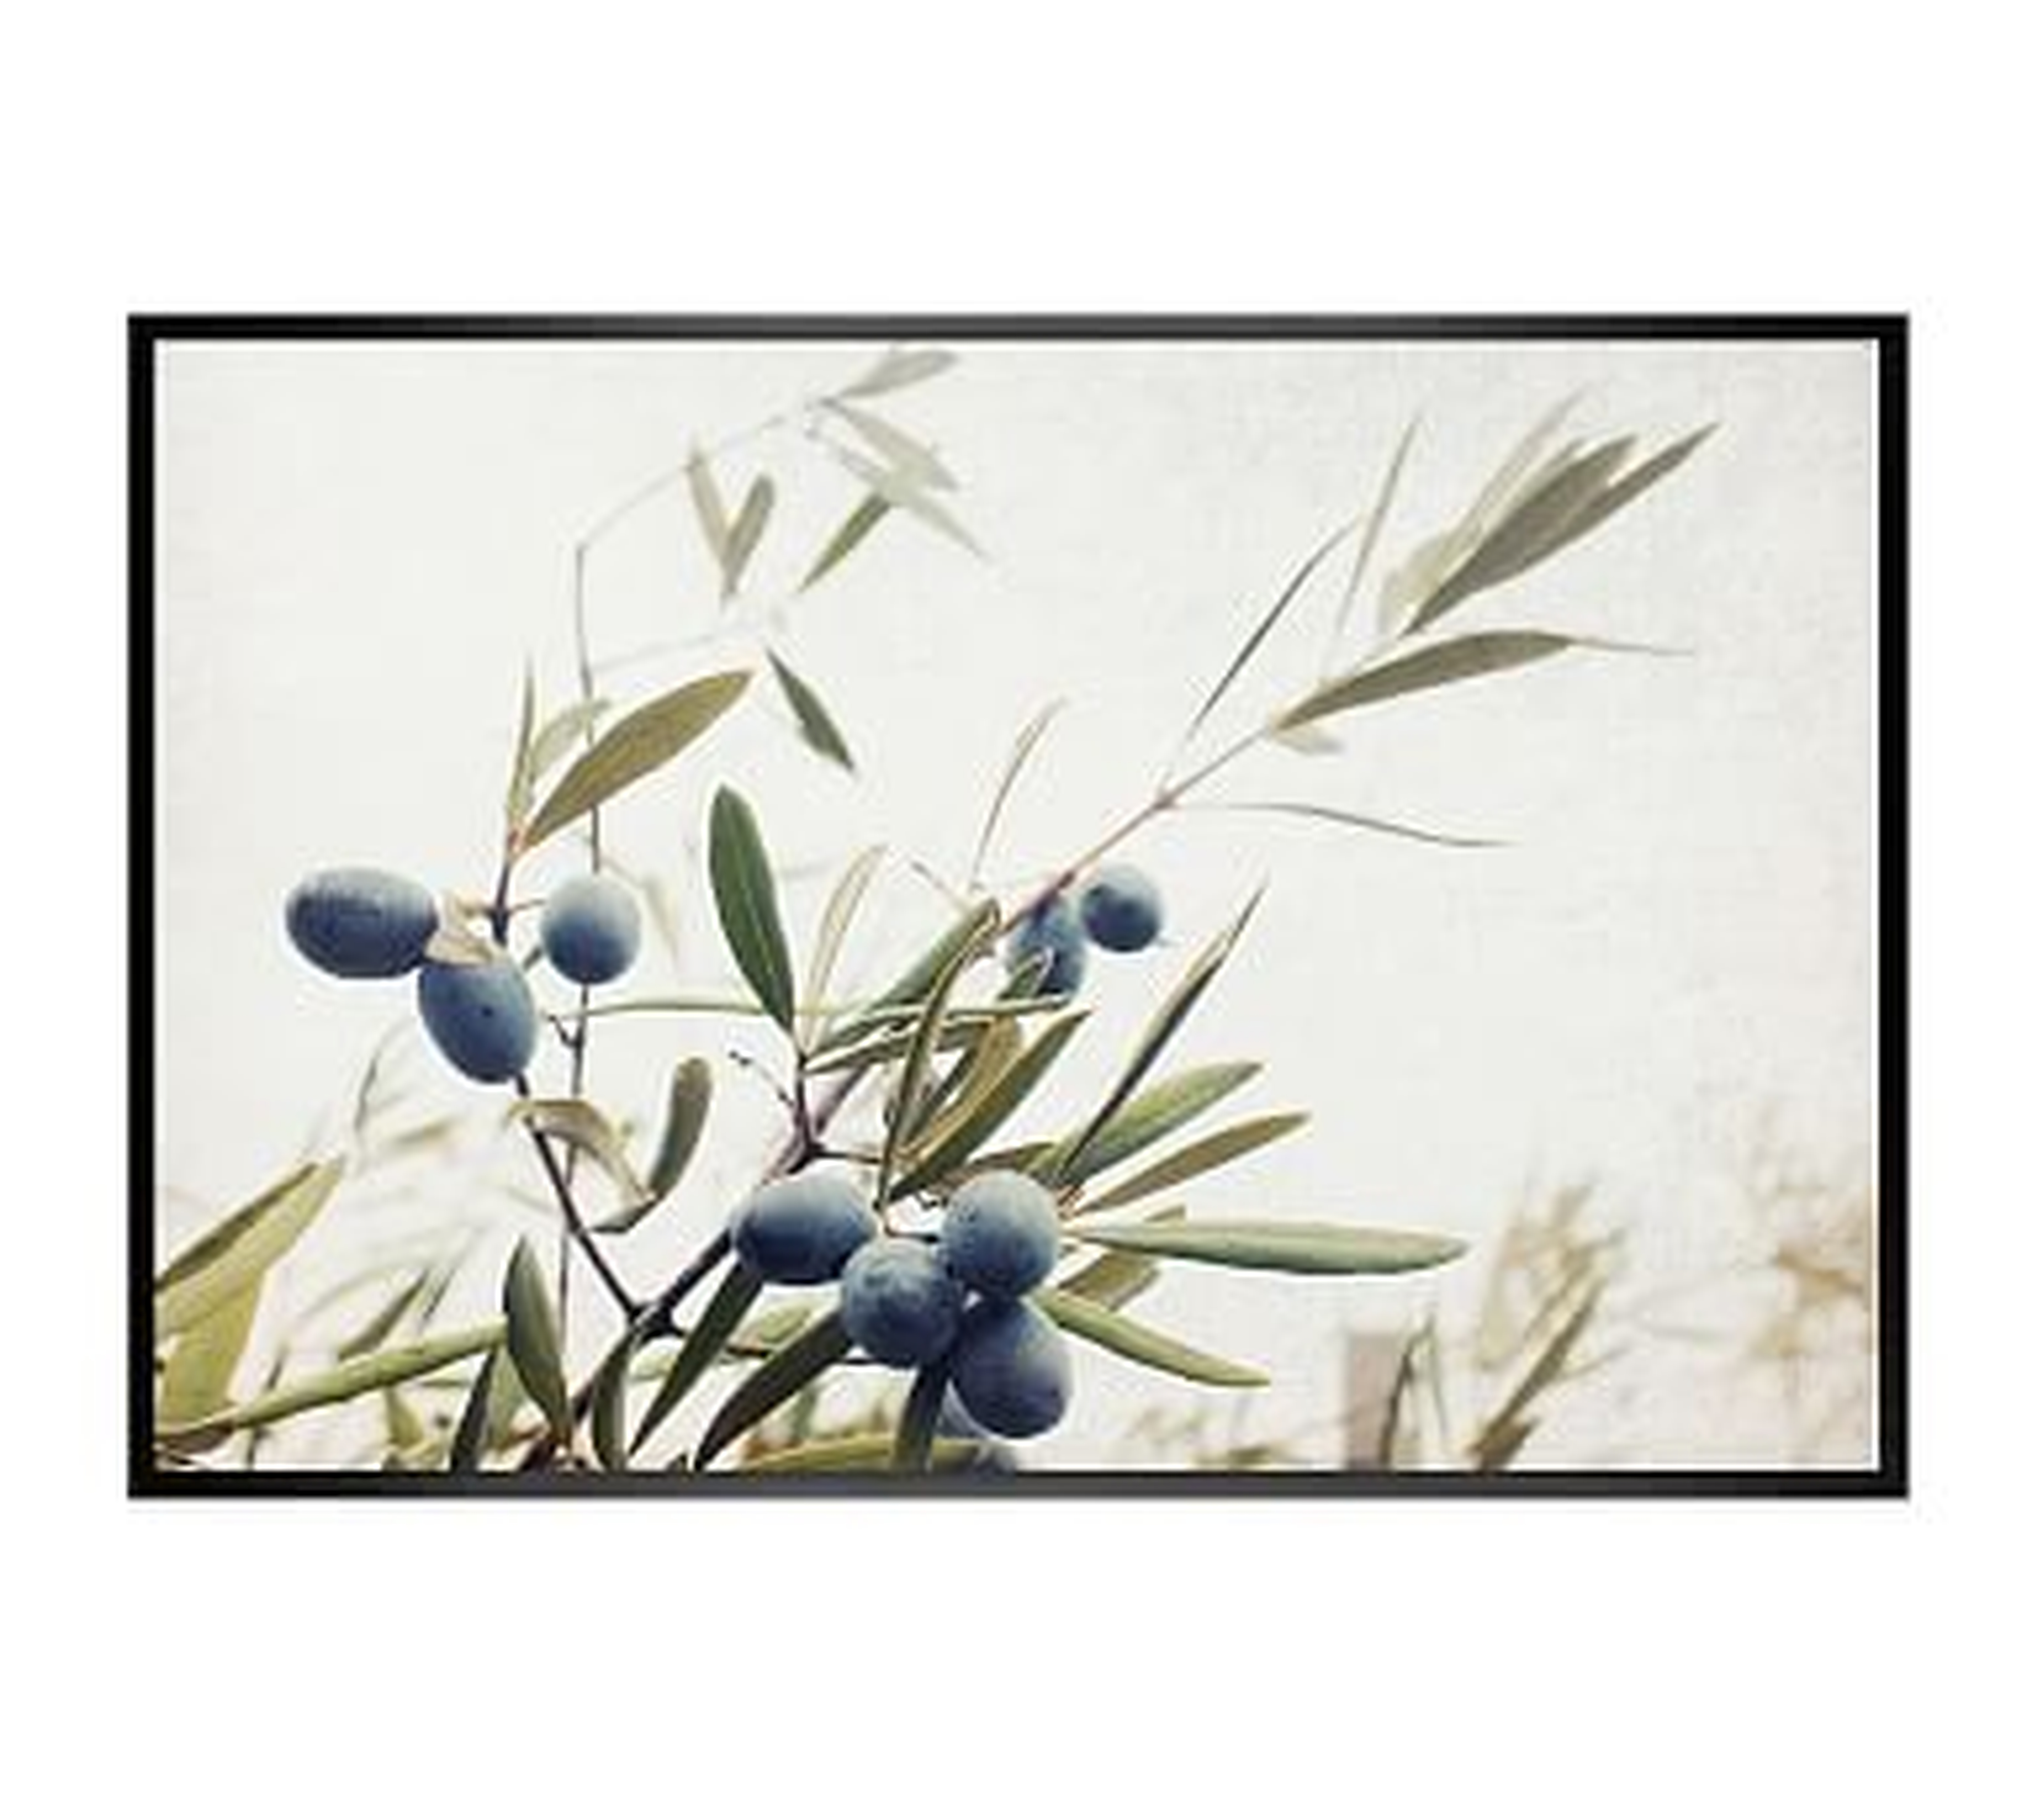 Olive Branches Paper Print by Lupen Grainne, 42 x 28", Wood Gallery, Black, No Mat - Pottery Barn